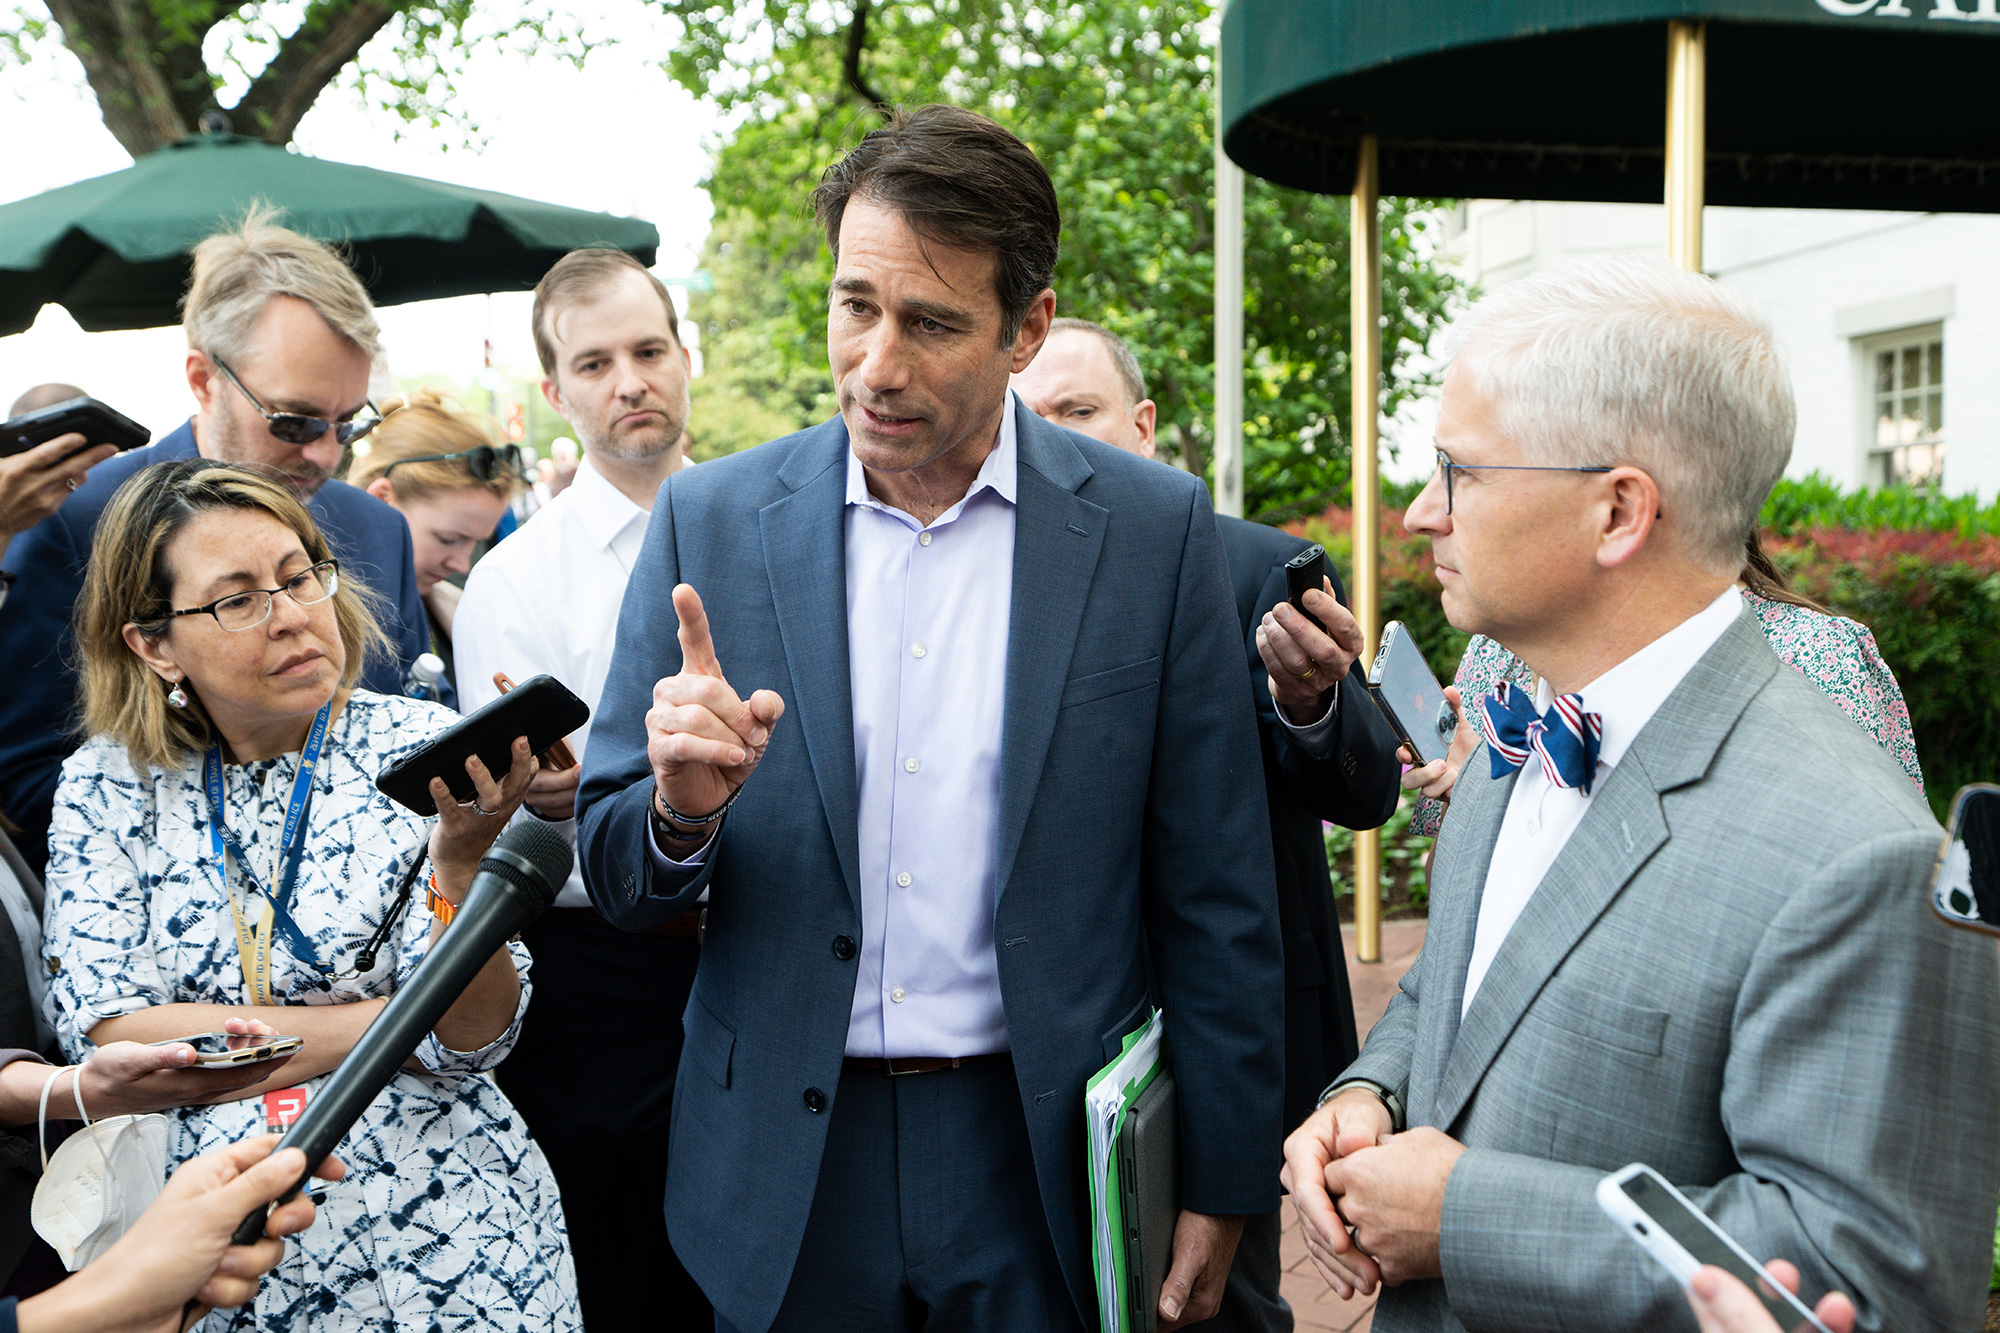 Rep. Garret Graves, center, speaks to reporters about debit ceiling negotiations in Washington DC, on May 23.